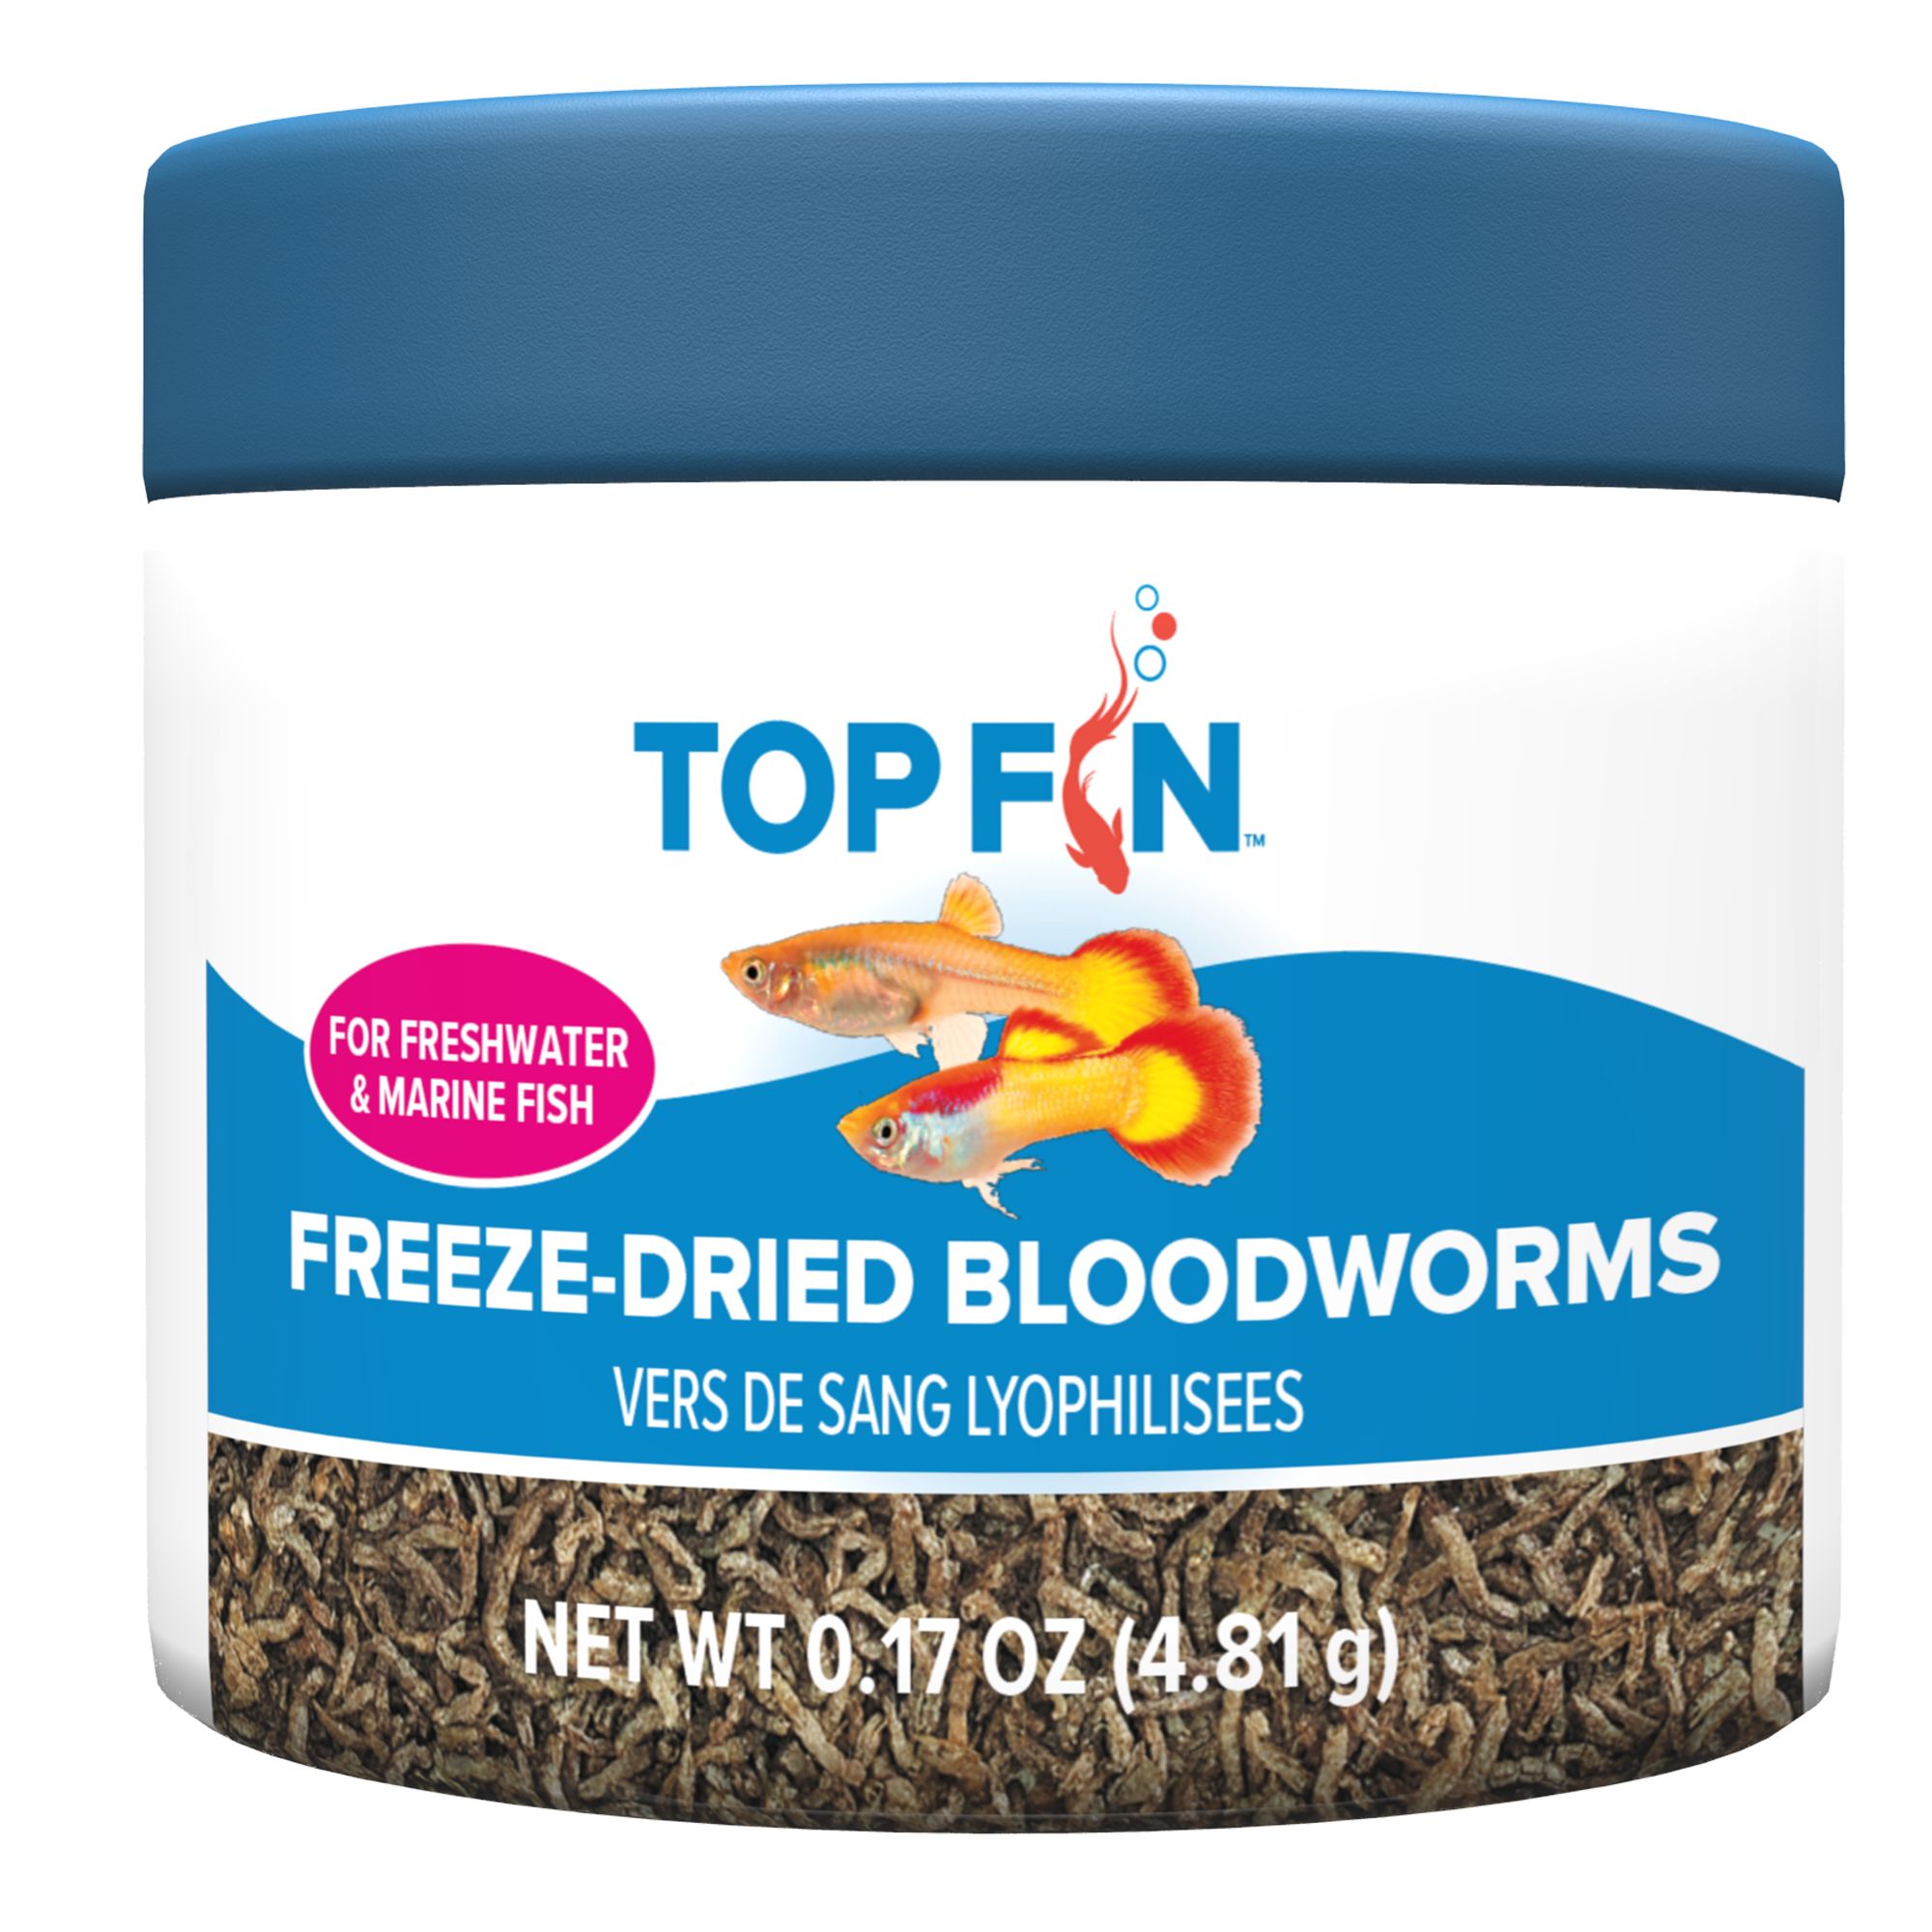 Top Fin® Freeze-Dried Bloodworms Fish Food, fish Food